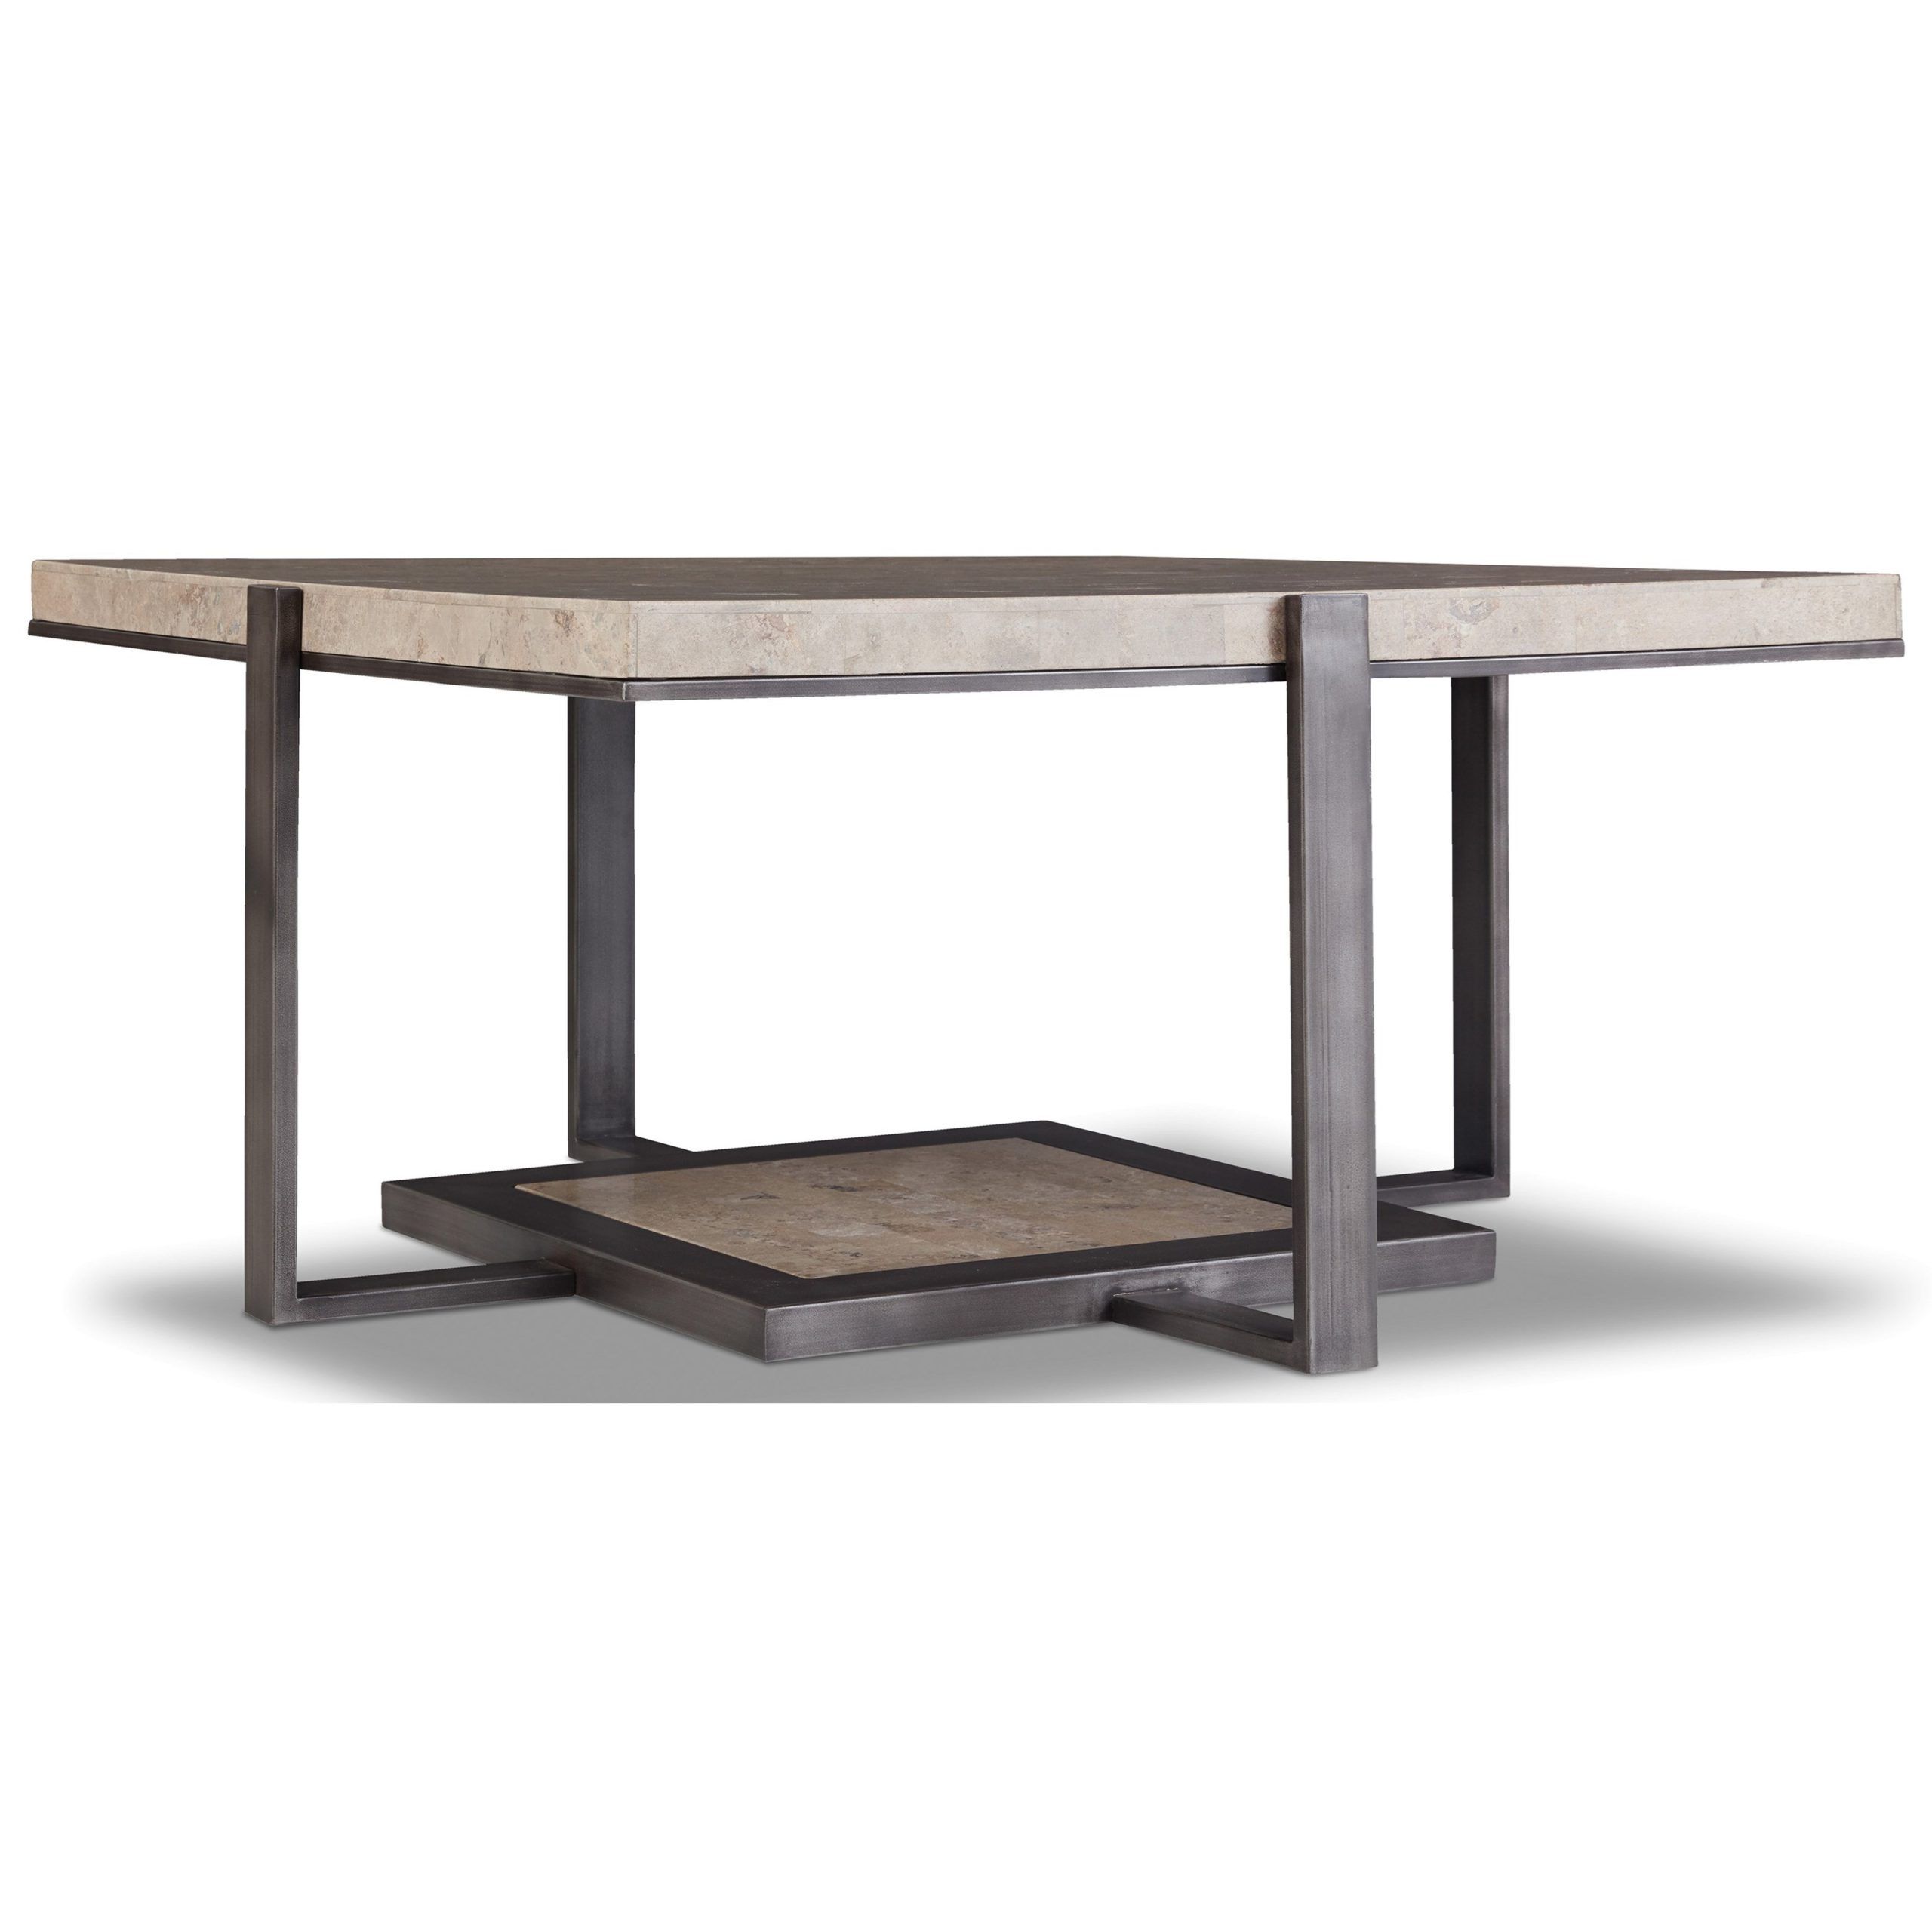 Hooker Furniture 5533 Square Cocktail Table With Marble Top | Mueller Intended For Hassch Modern Square Cocktail Tables (View 18 of 20)